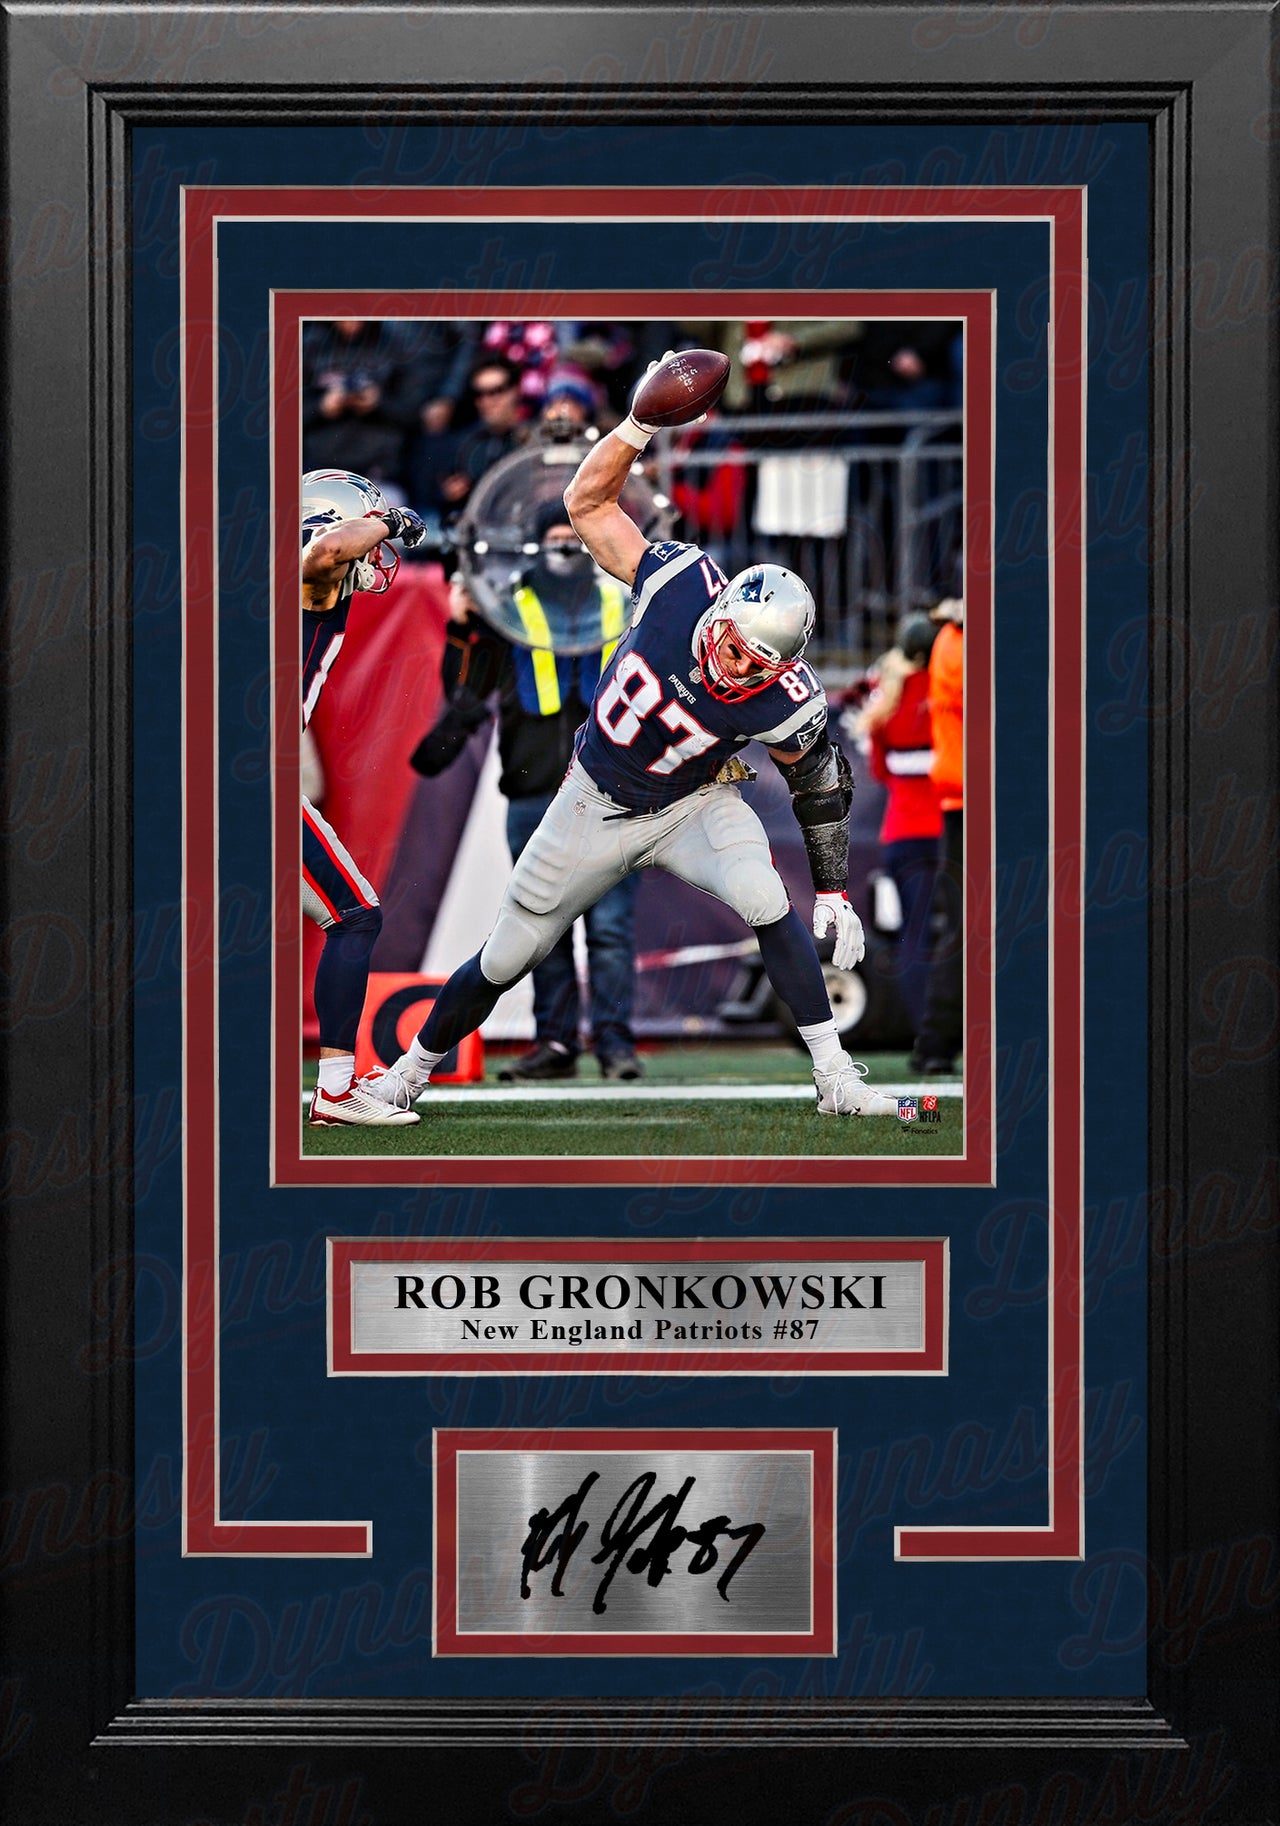 Rob Gronkowski Touchdown Spike New England Patriots 8" x 10" Framed Photo with Engraved Autograph - Dynasty Sports & Framing 